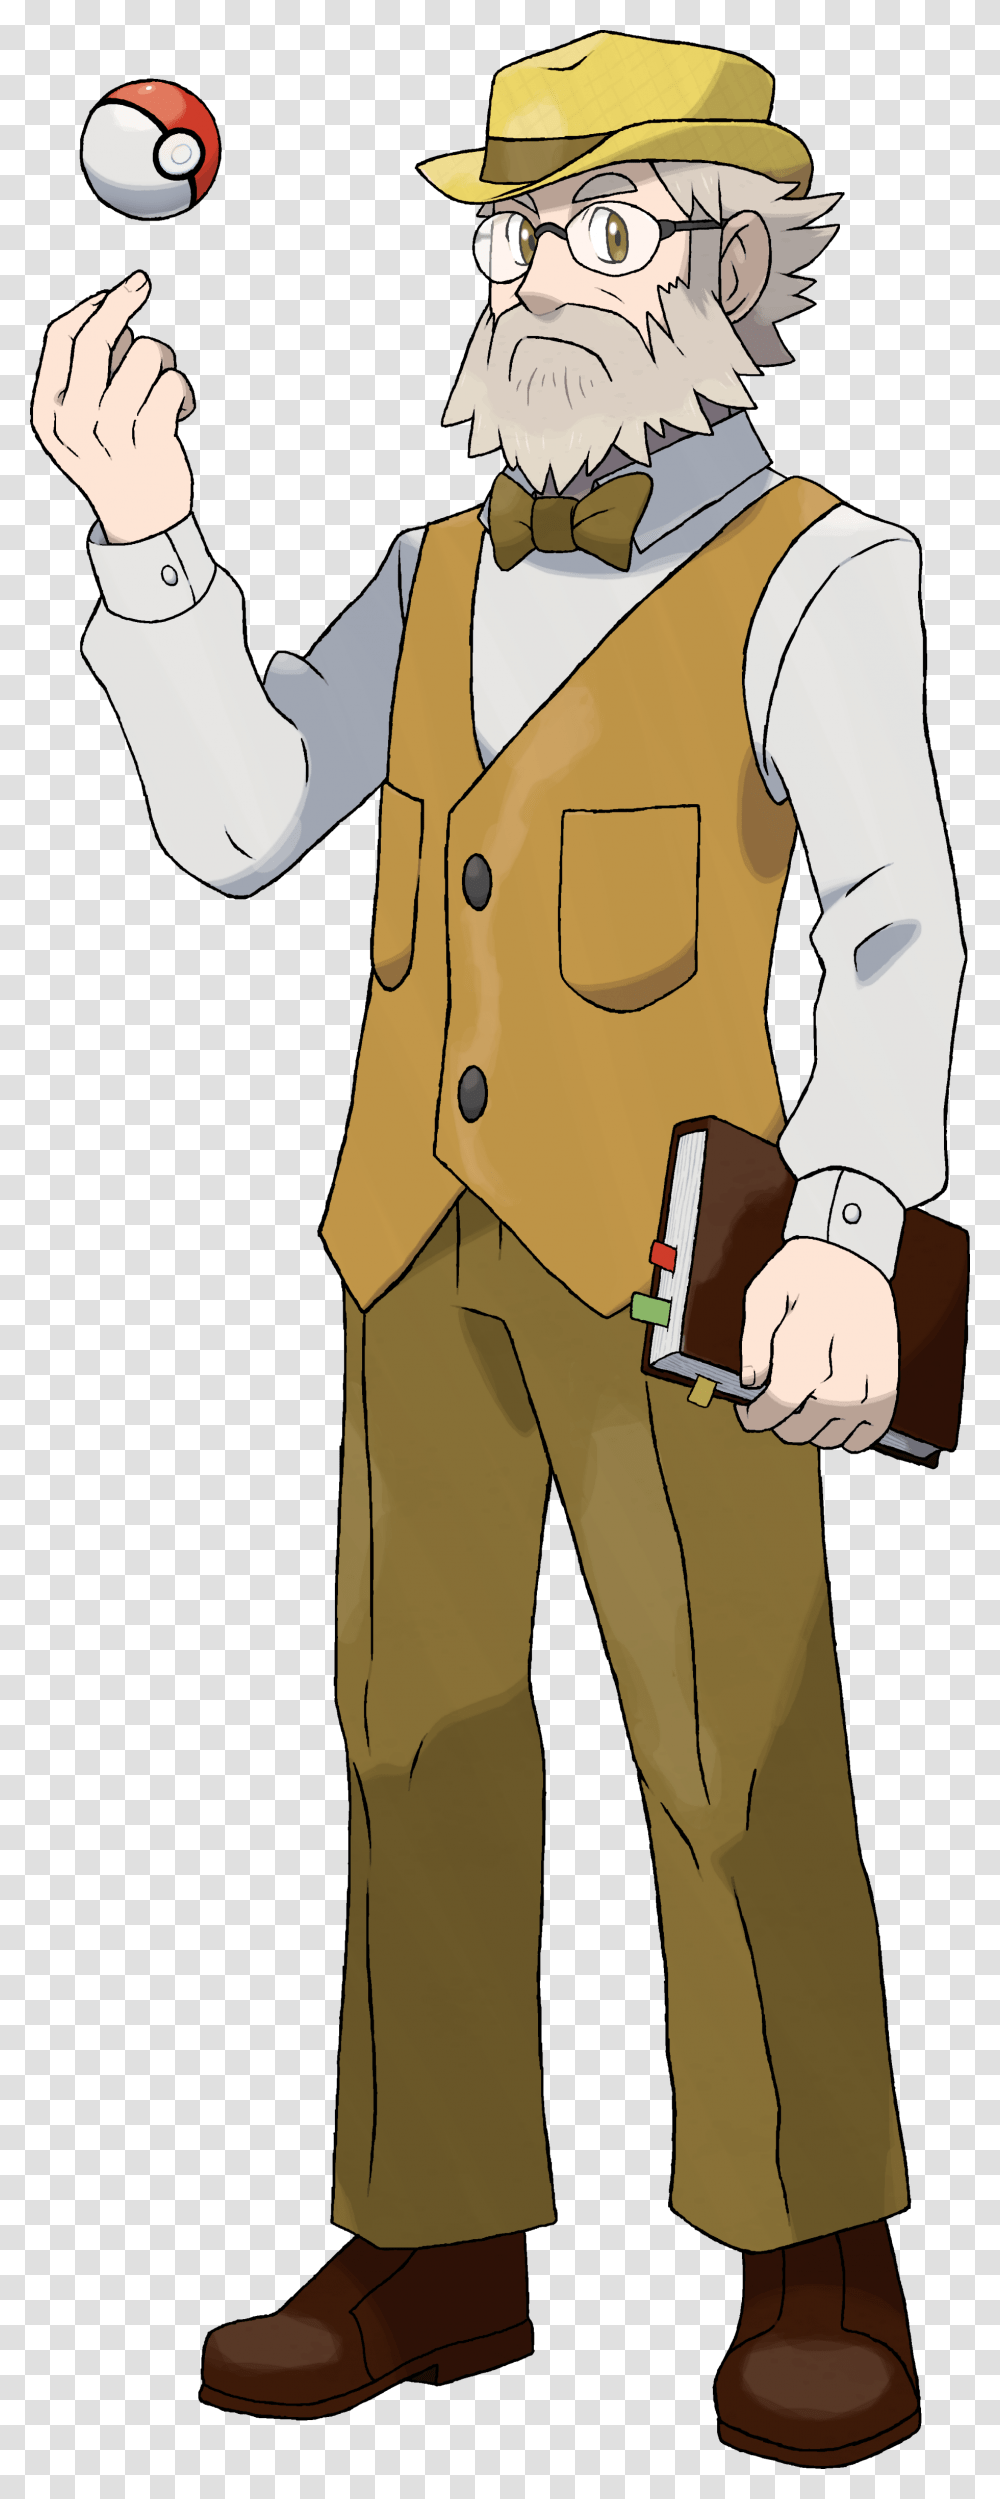 Capx Wiki Fan Made Pokemon Professors, Person, Military, Military Uniform Transparent Png